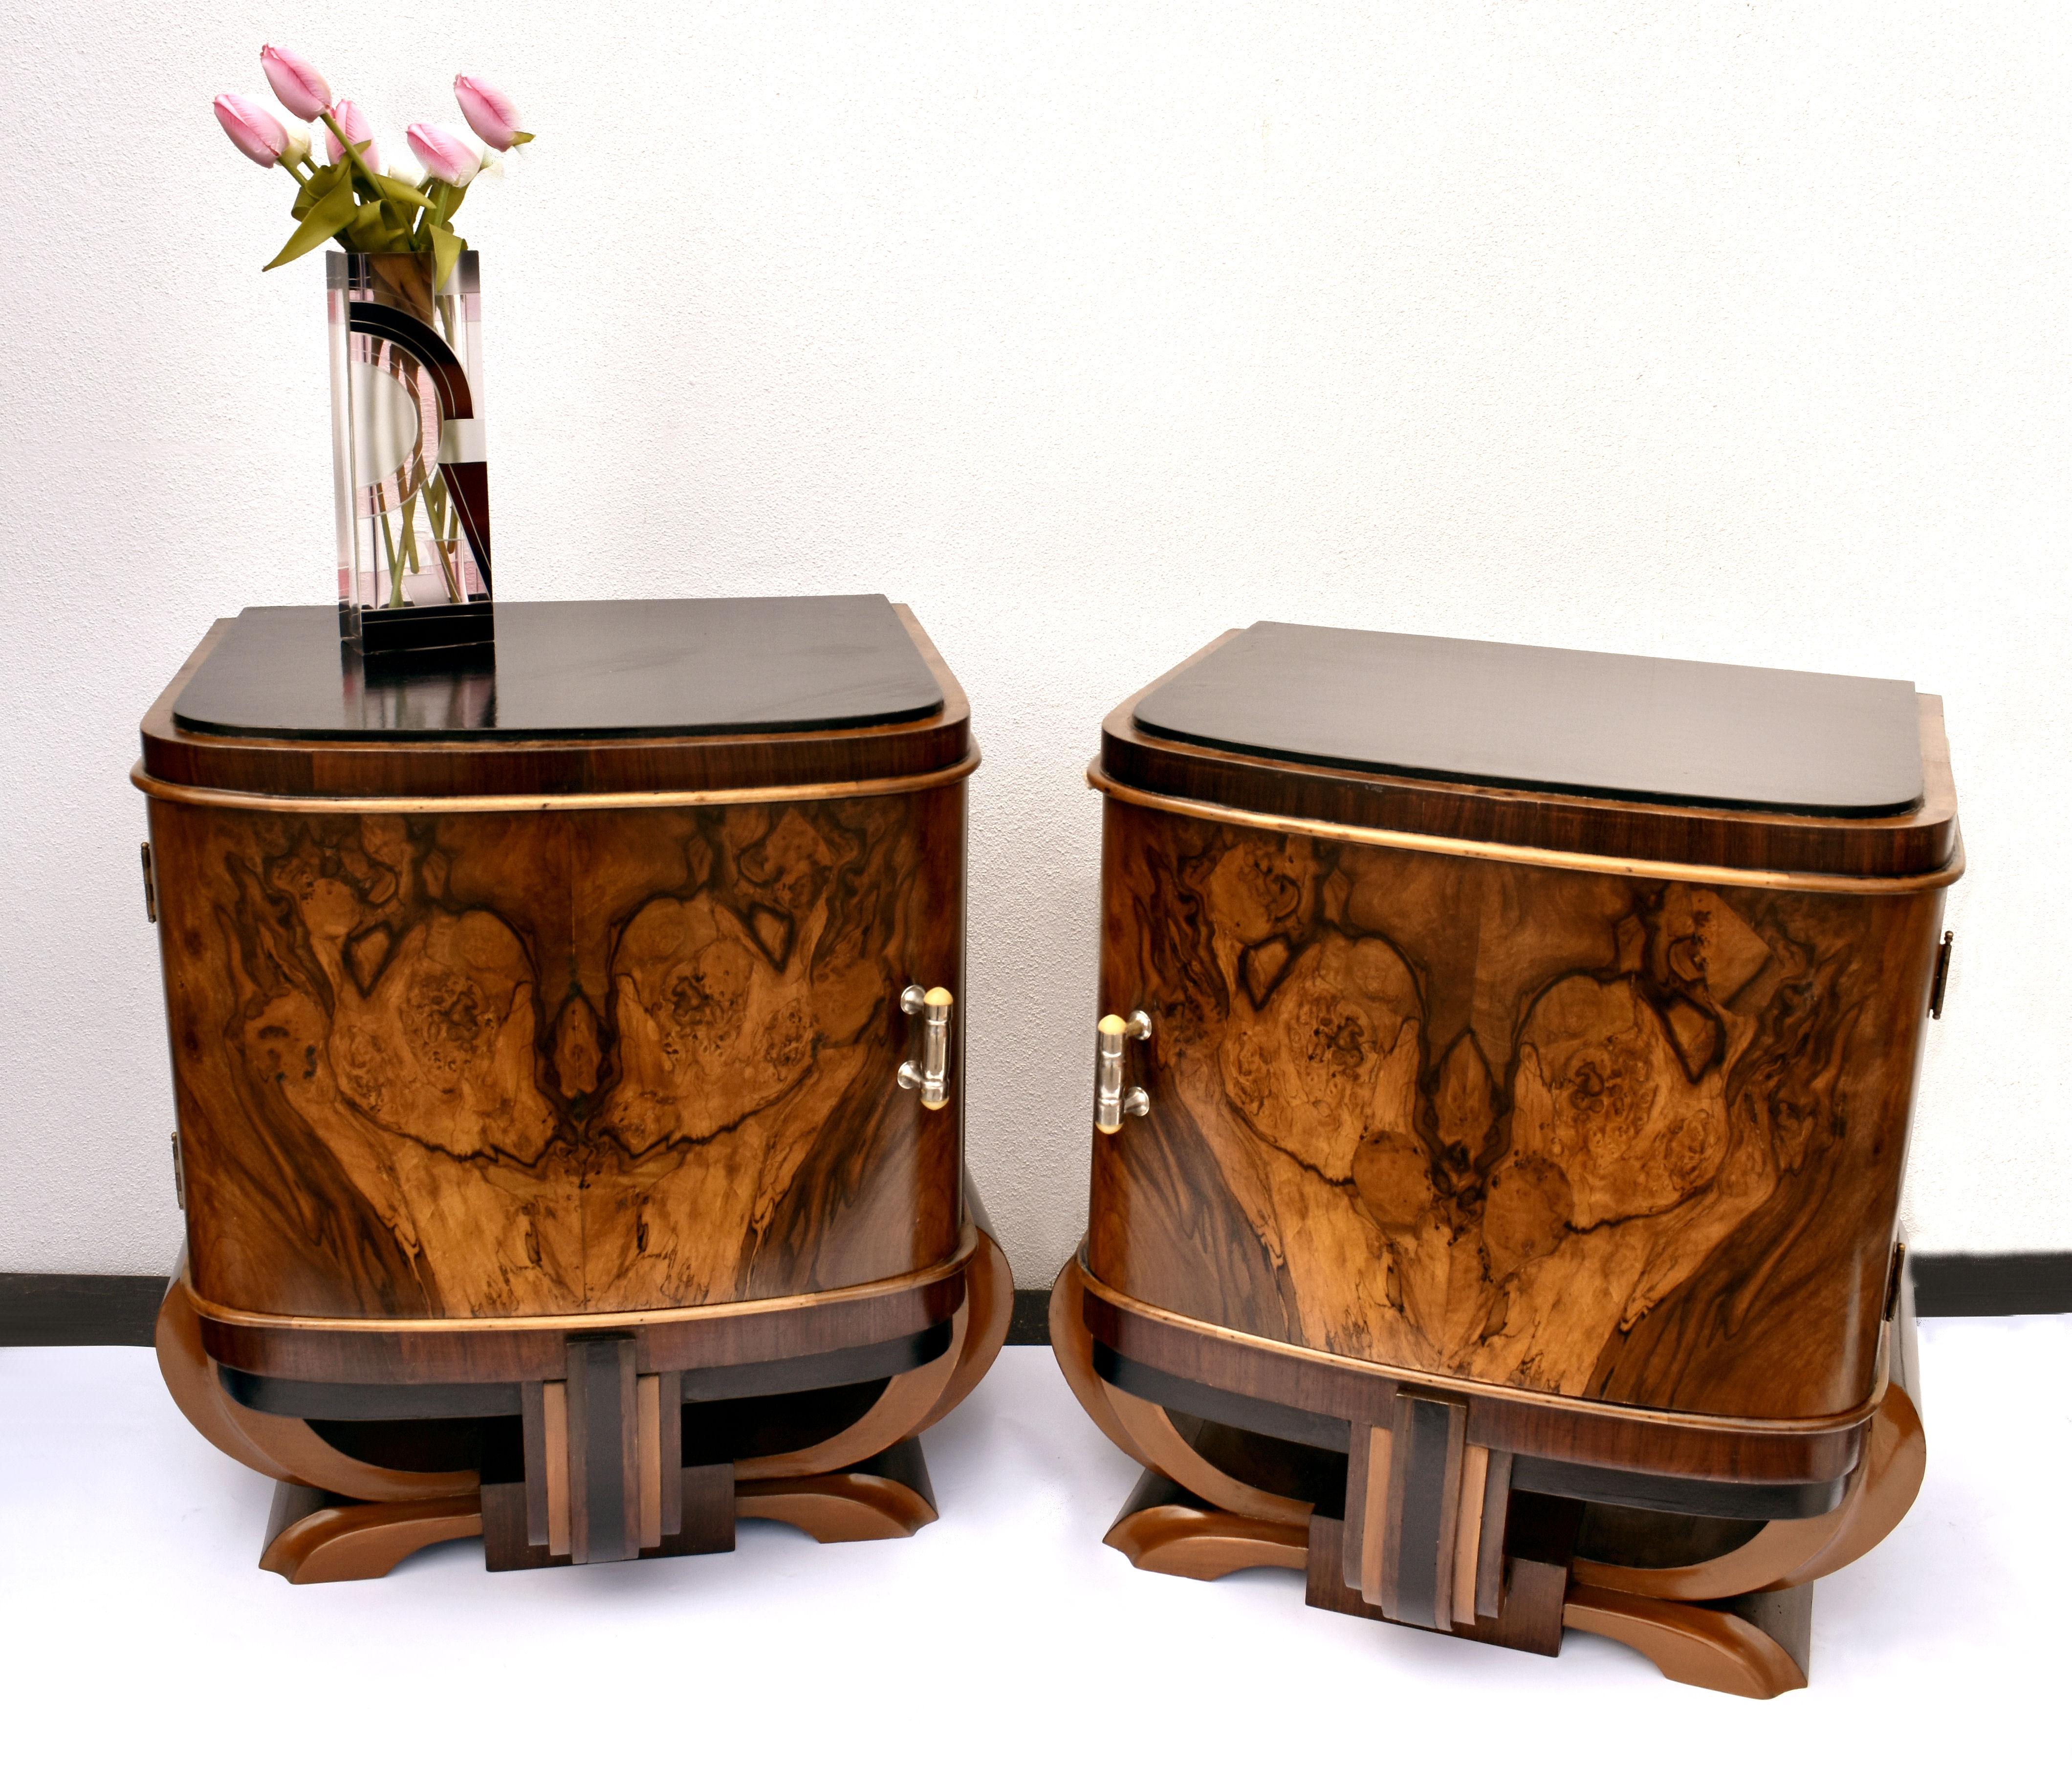 A rare opportunity to acquire such high styled and totally original Art Deco bedside tables. Originating from Italy and dating to the early 1930s they fill both the highly desired shape of Art Deco at its best and sort after the luscious veneers